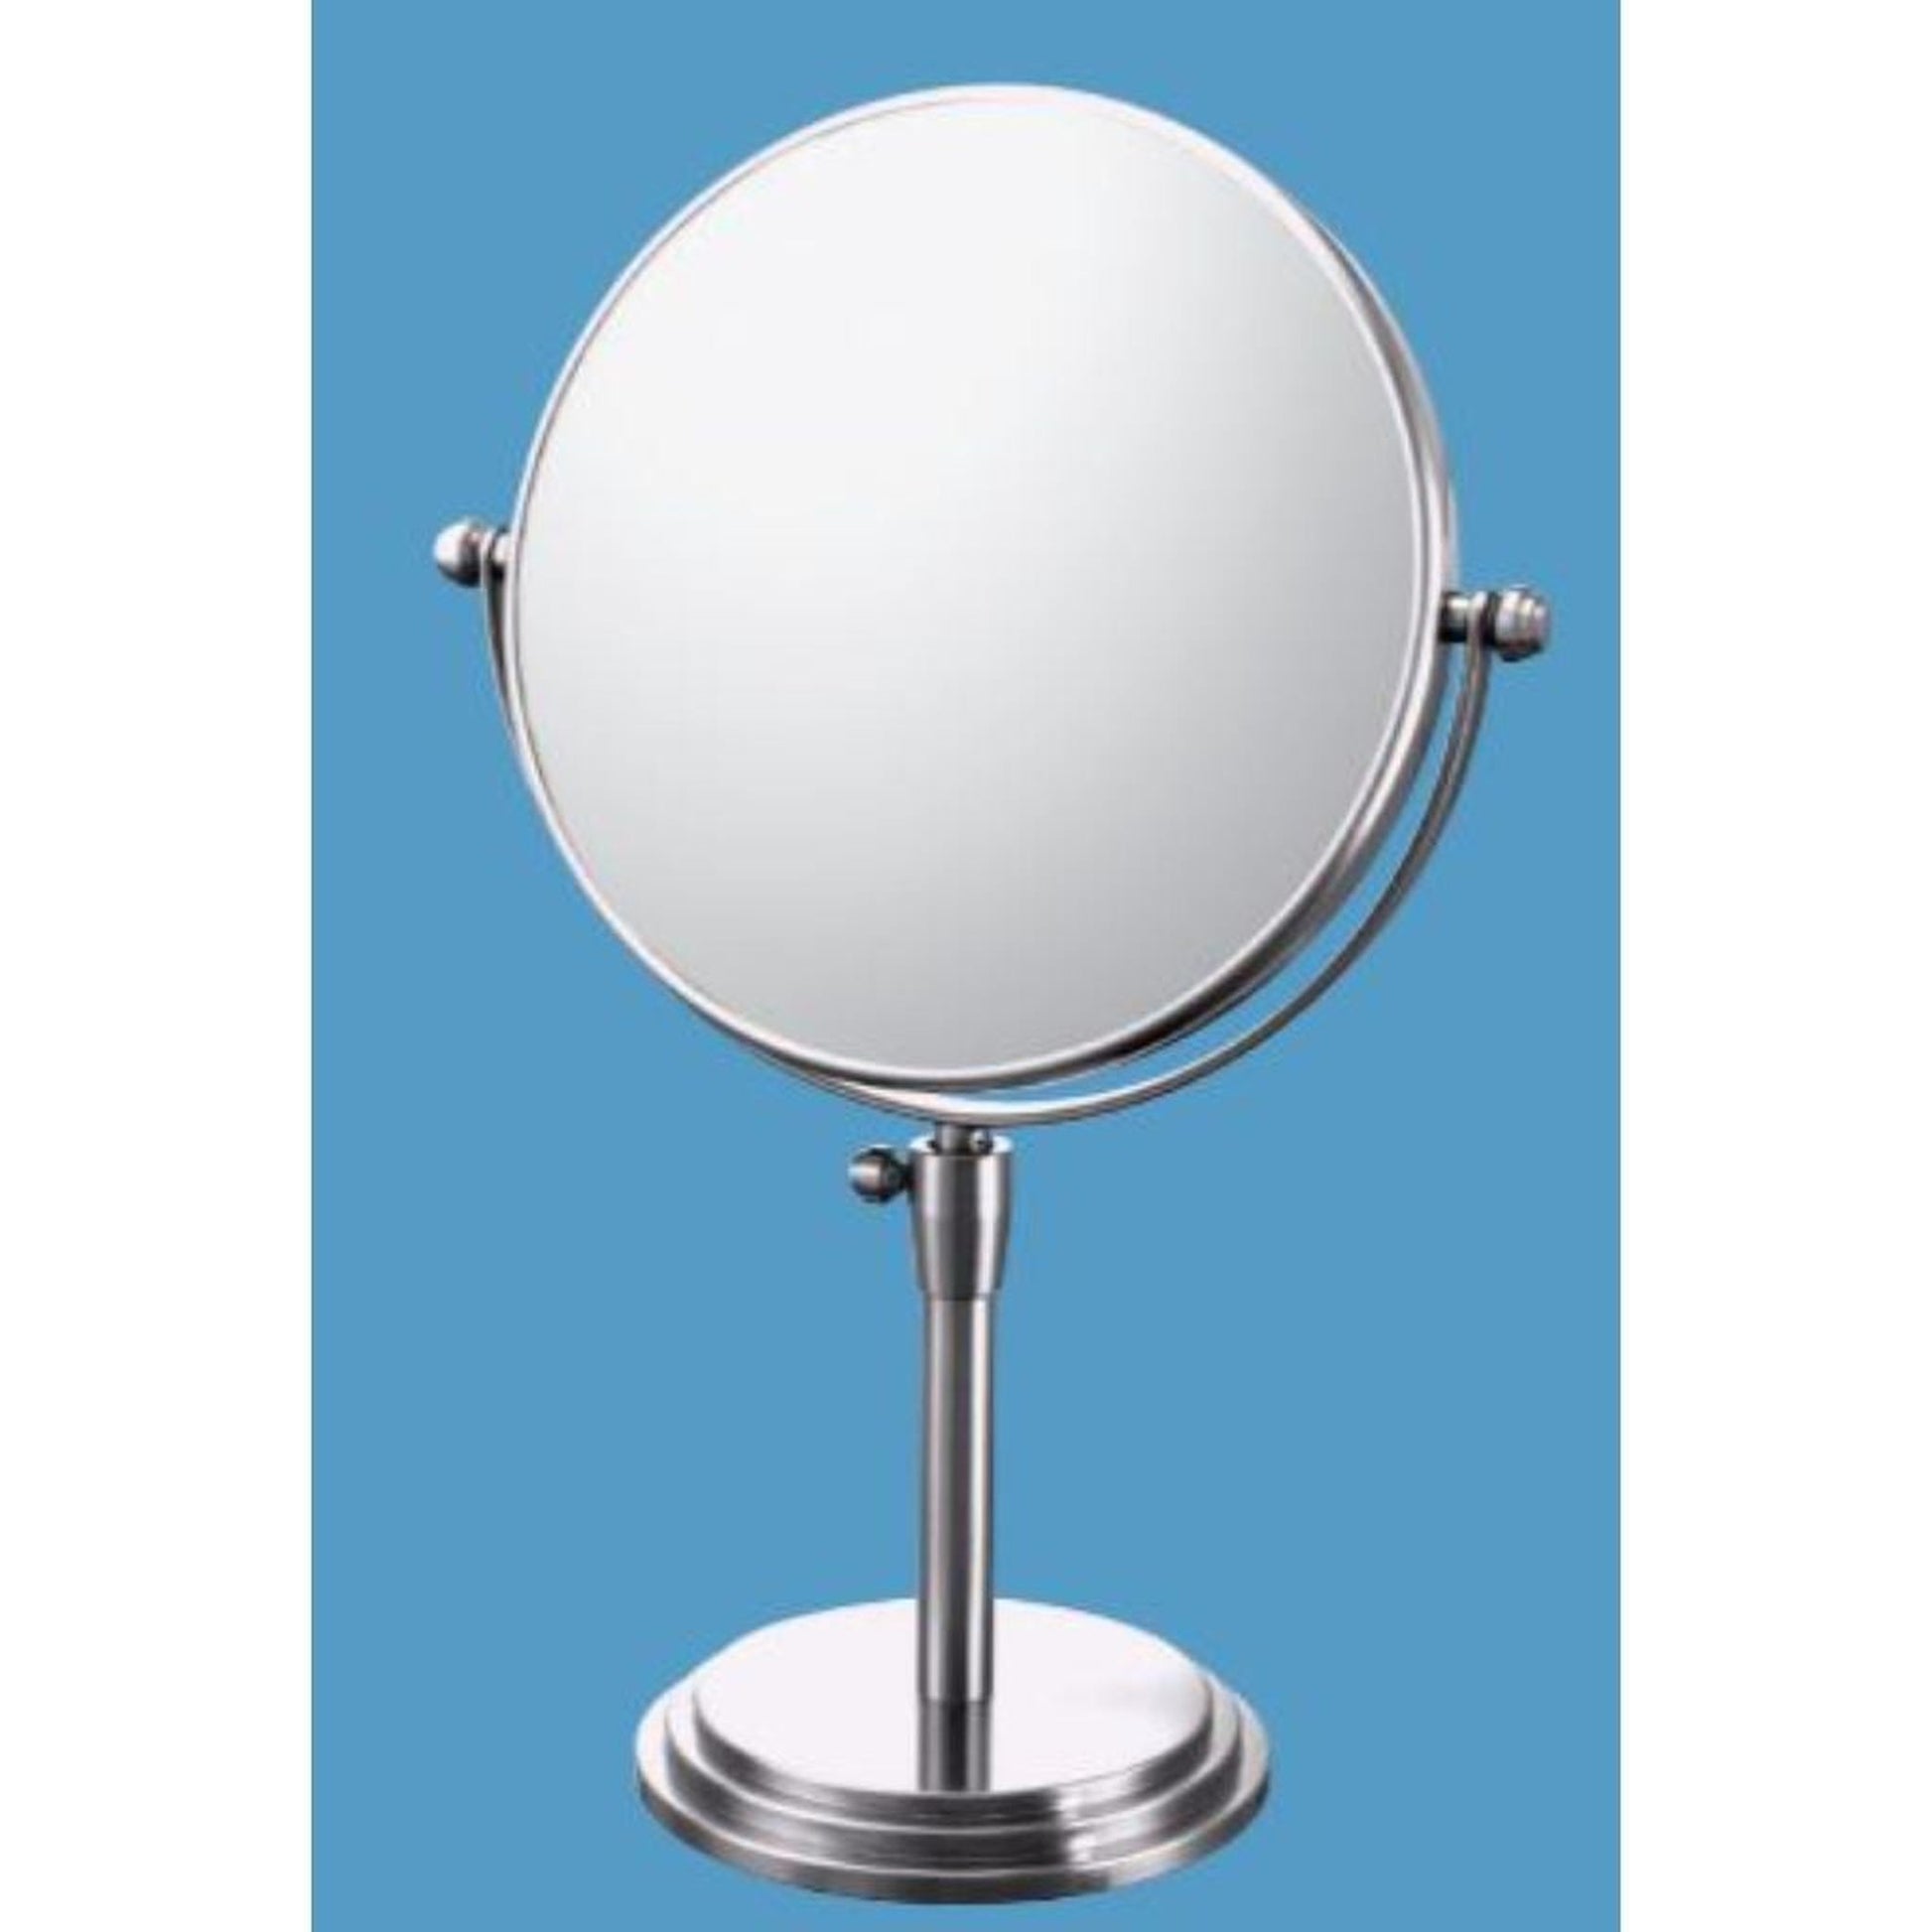 Aptations Mirror Image 8" x 17" Chrome Freestanding Classic Adjustable 1X/5X Magnified Makeup Mirror